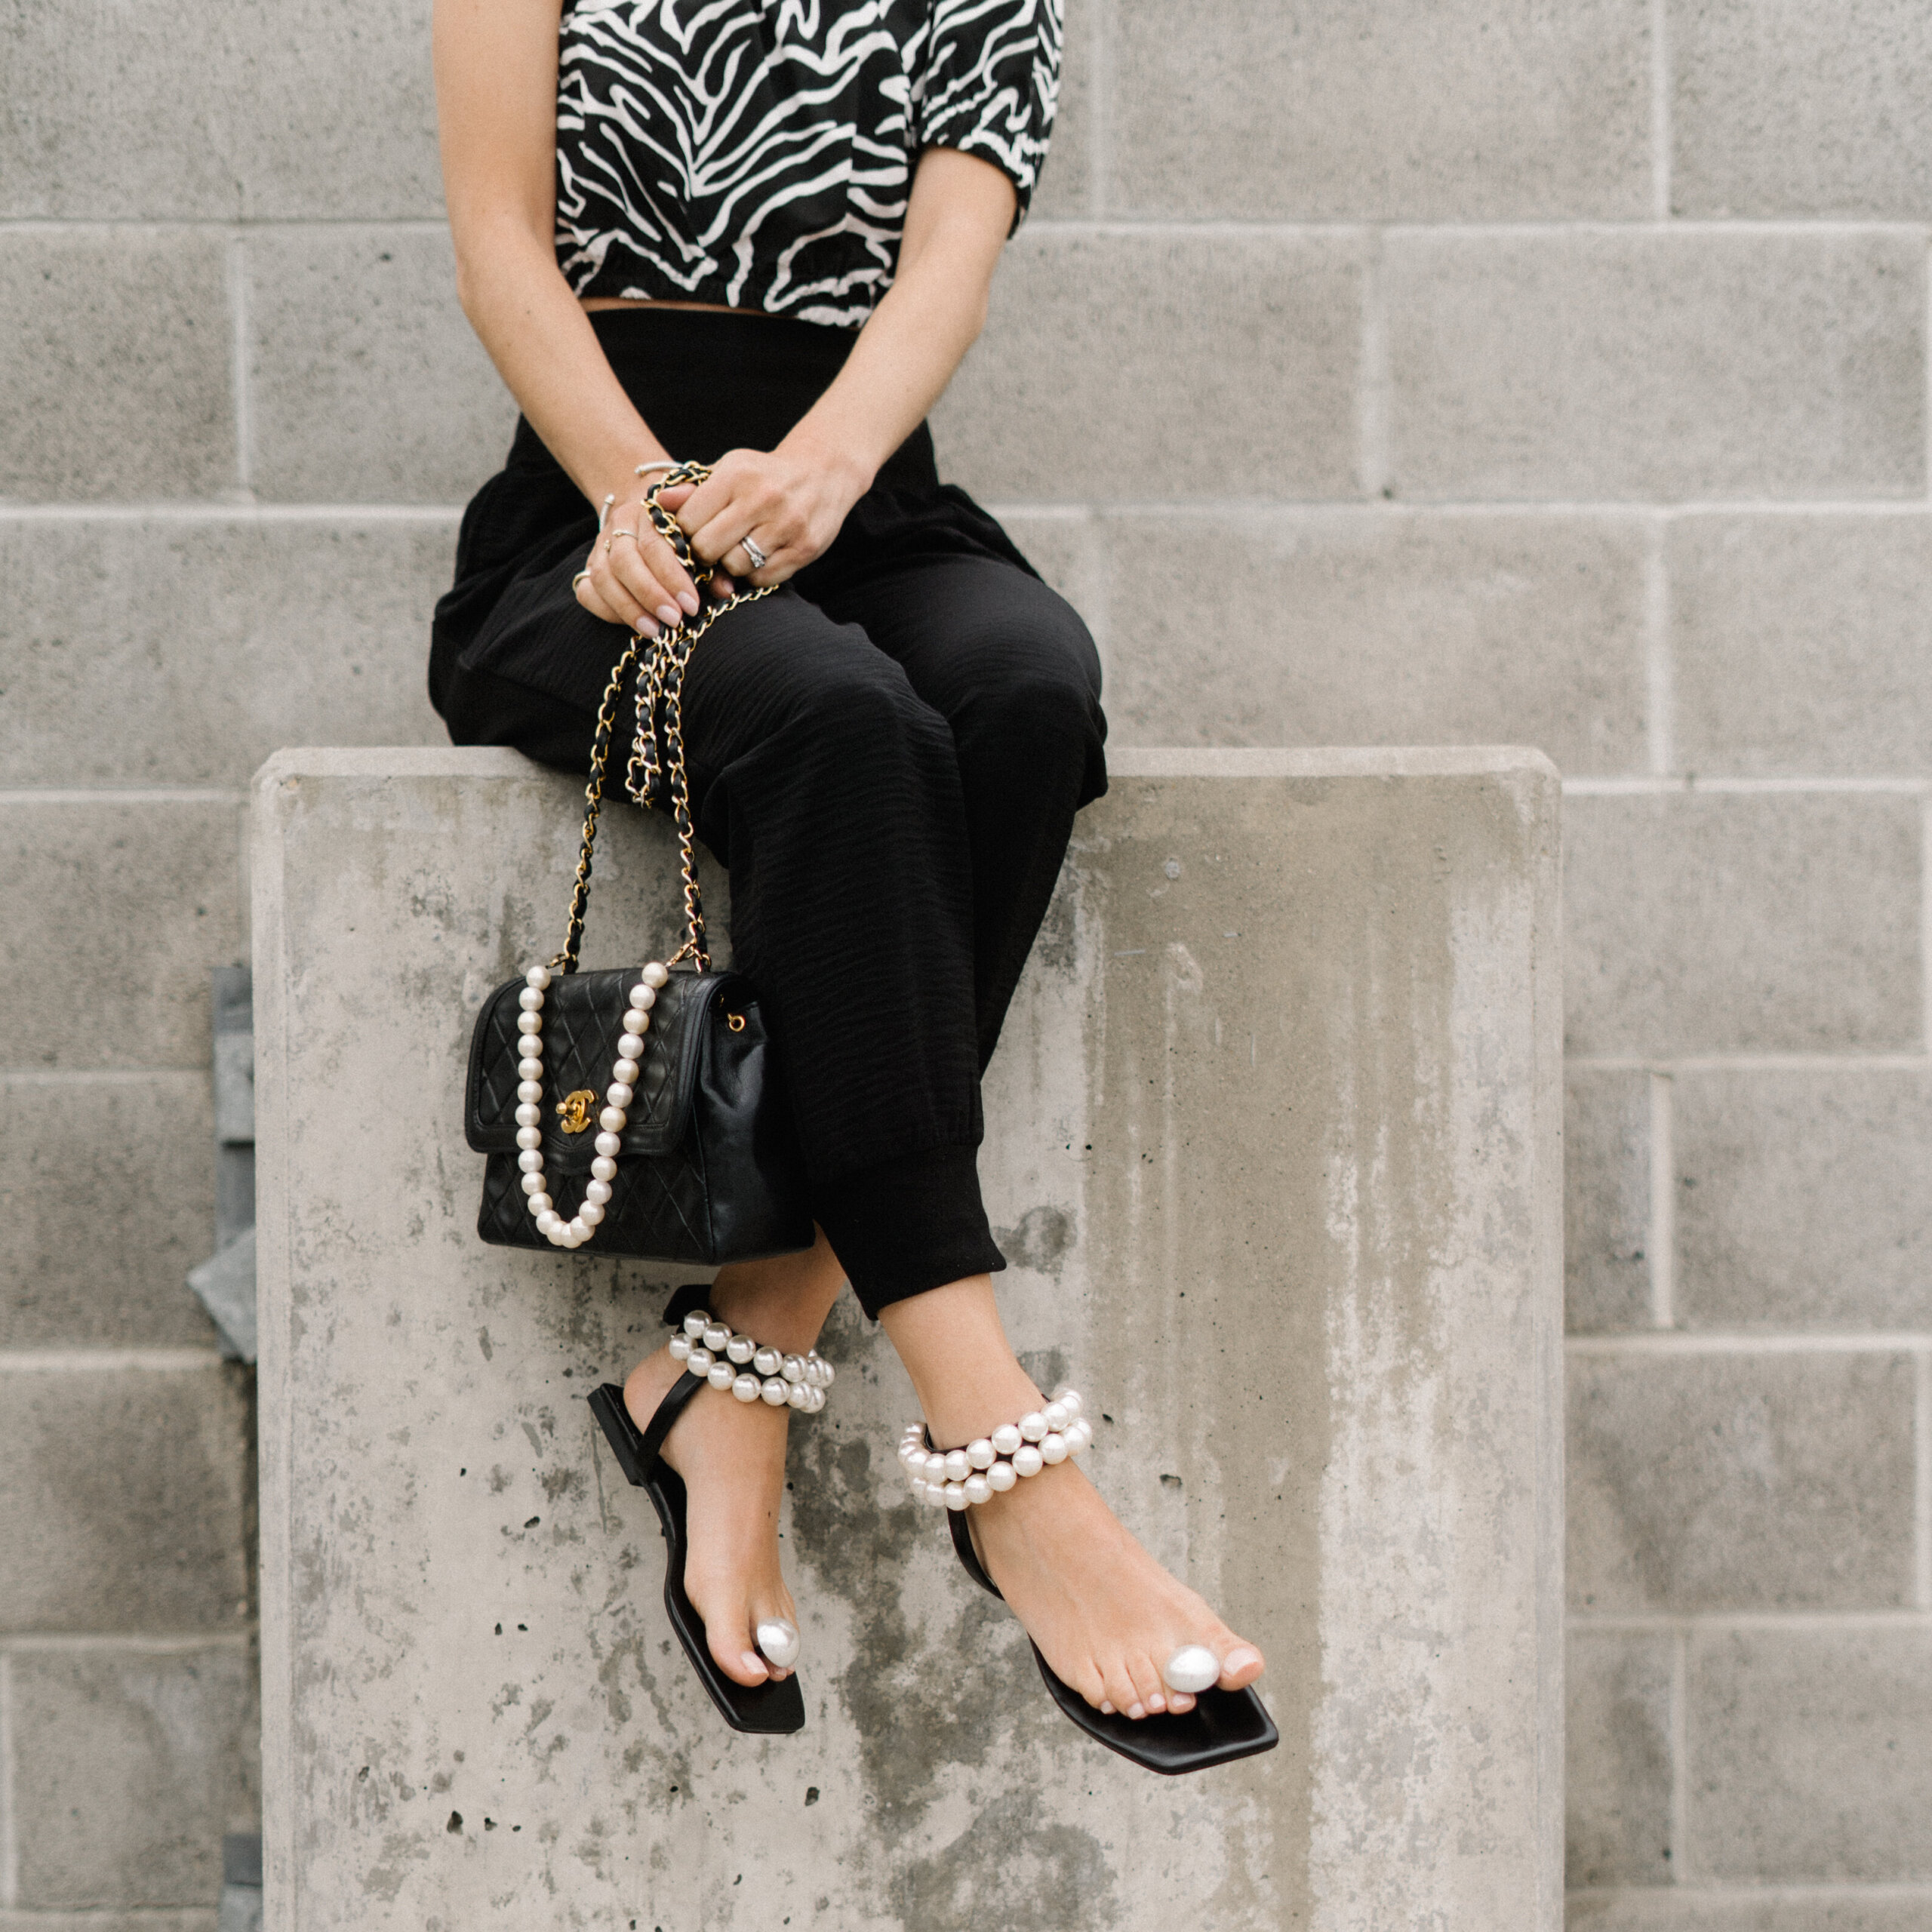 BLACK AND WHITE OUTFITS FOR SUMMER